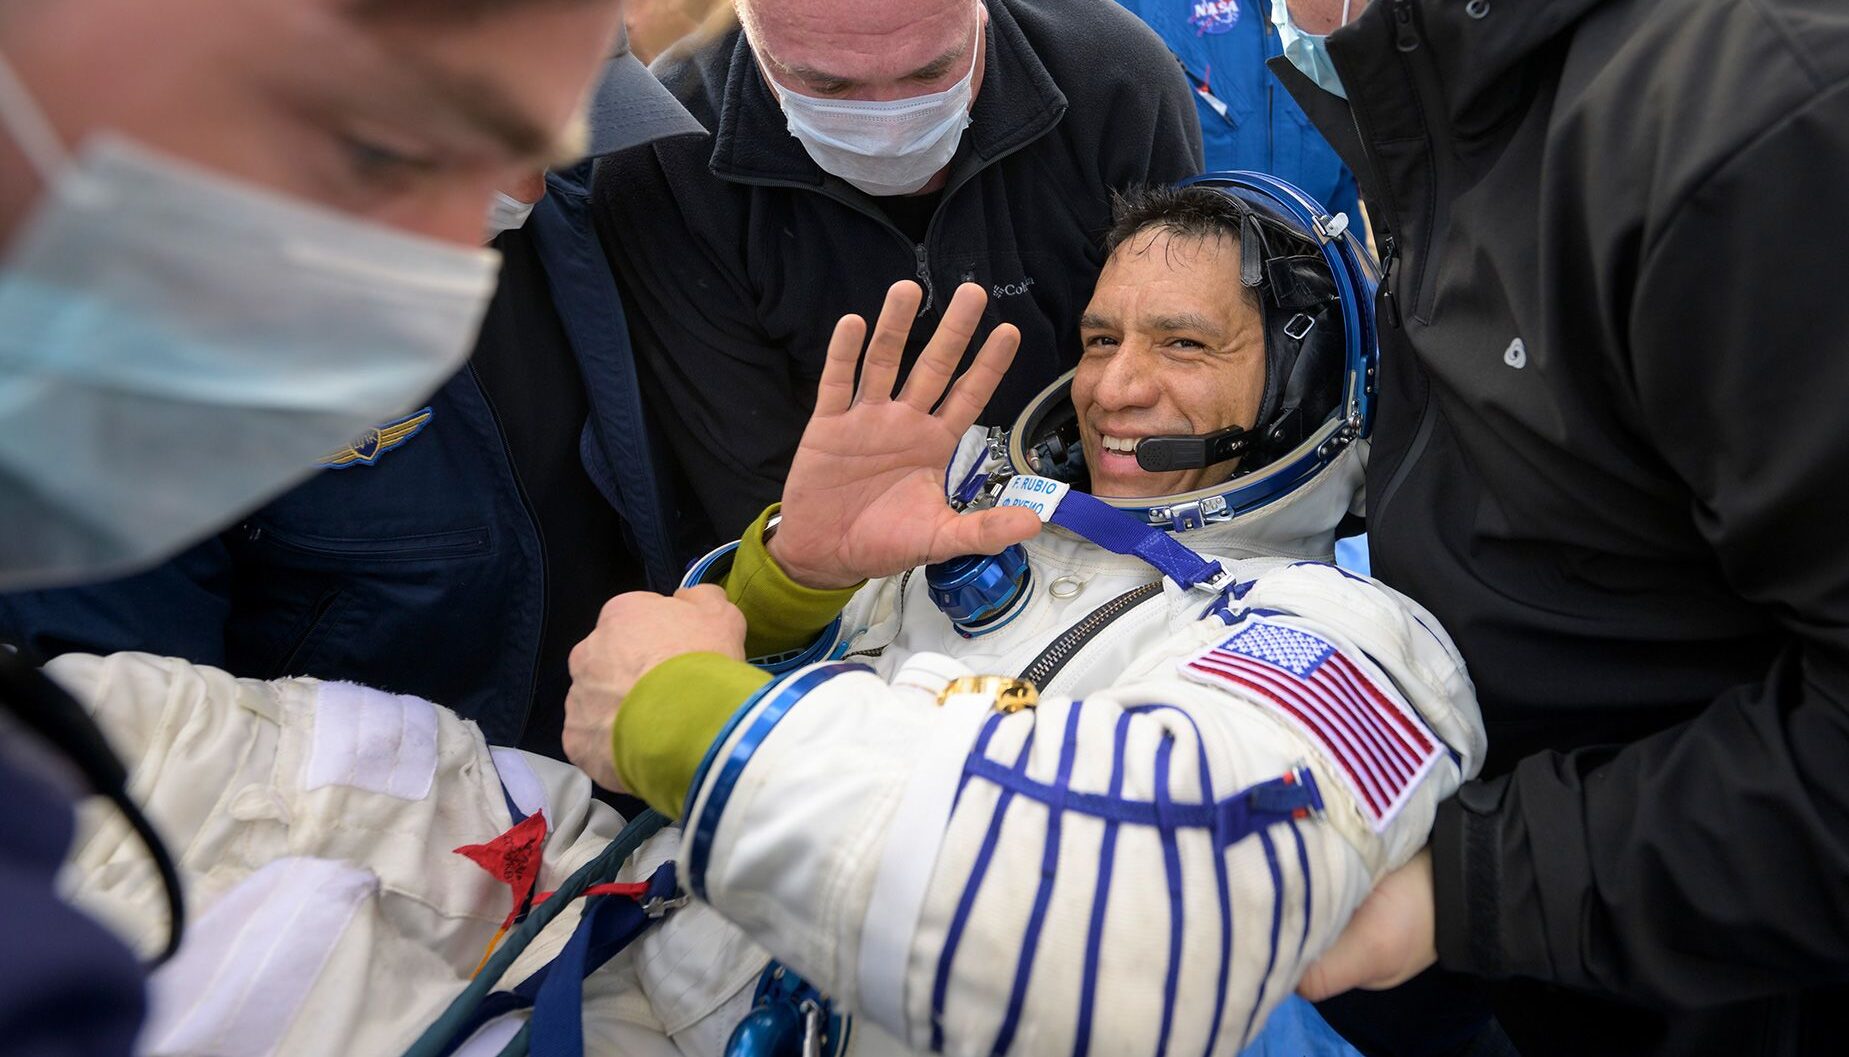 NASA Astronaut Frank Rubio Returns from Record-Breaking Space Mission After 371 Days